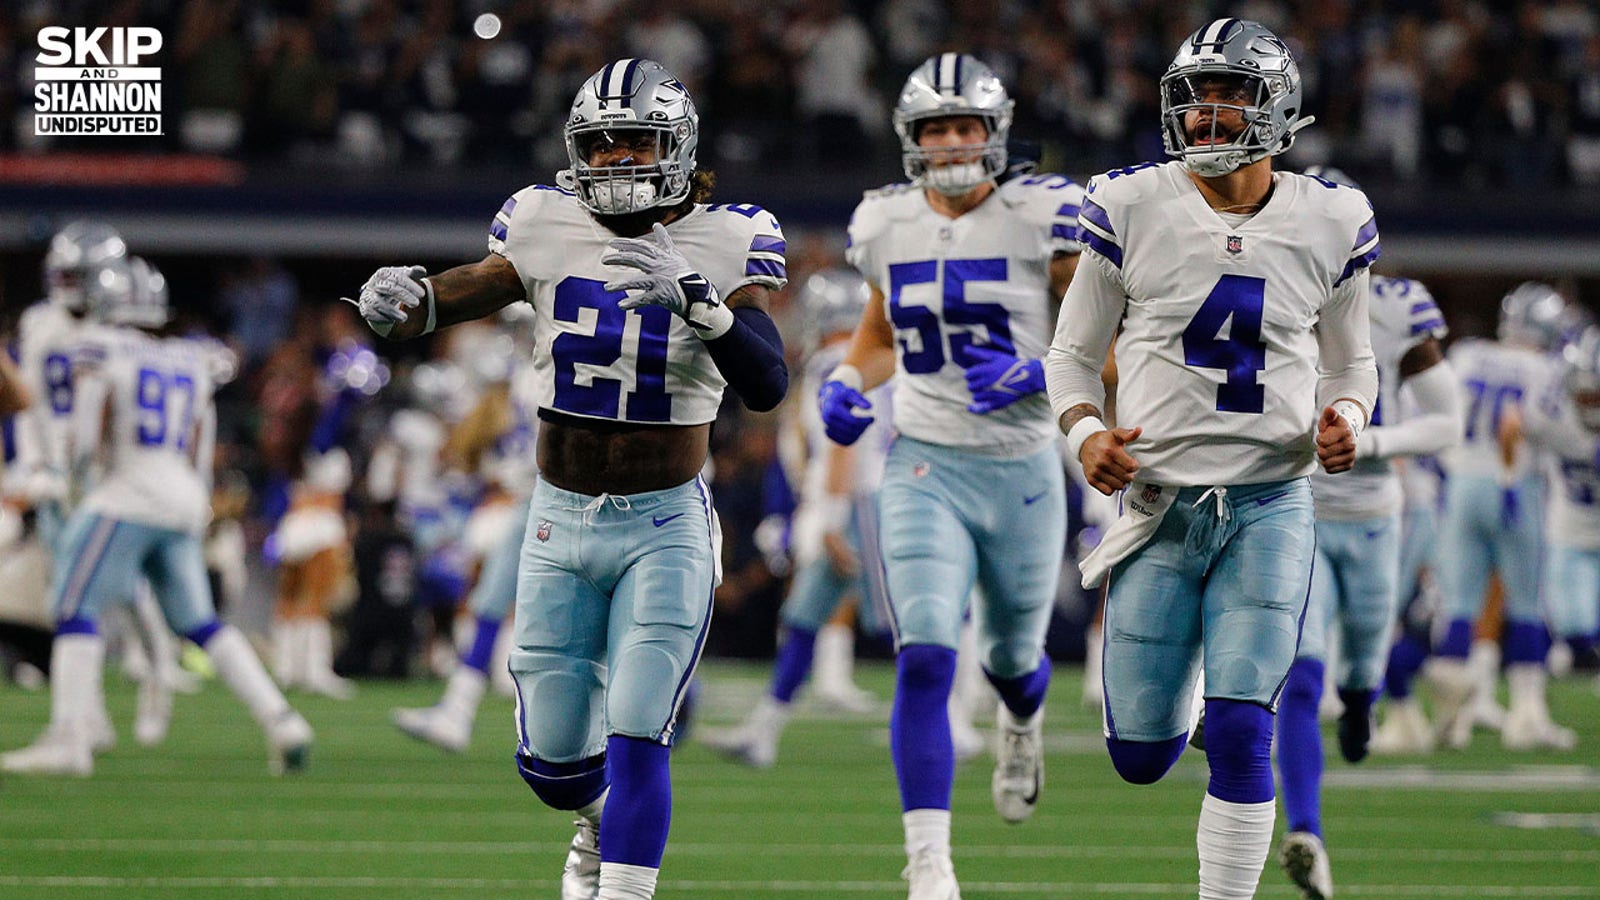 Can Cowboys fix the flaws exposed in playoff loss?